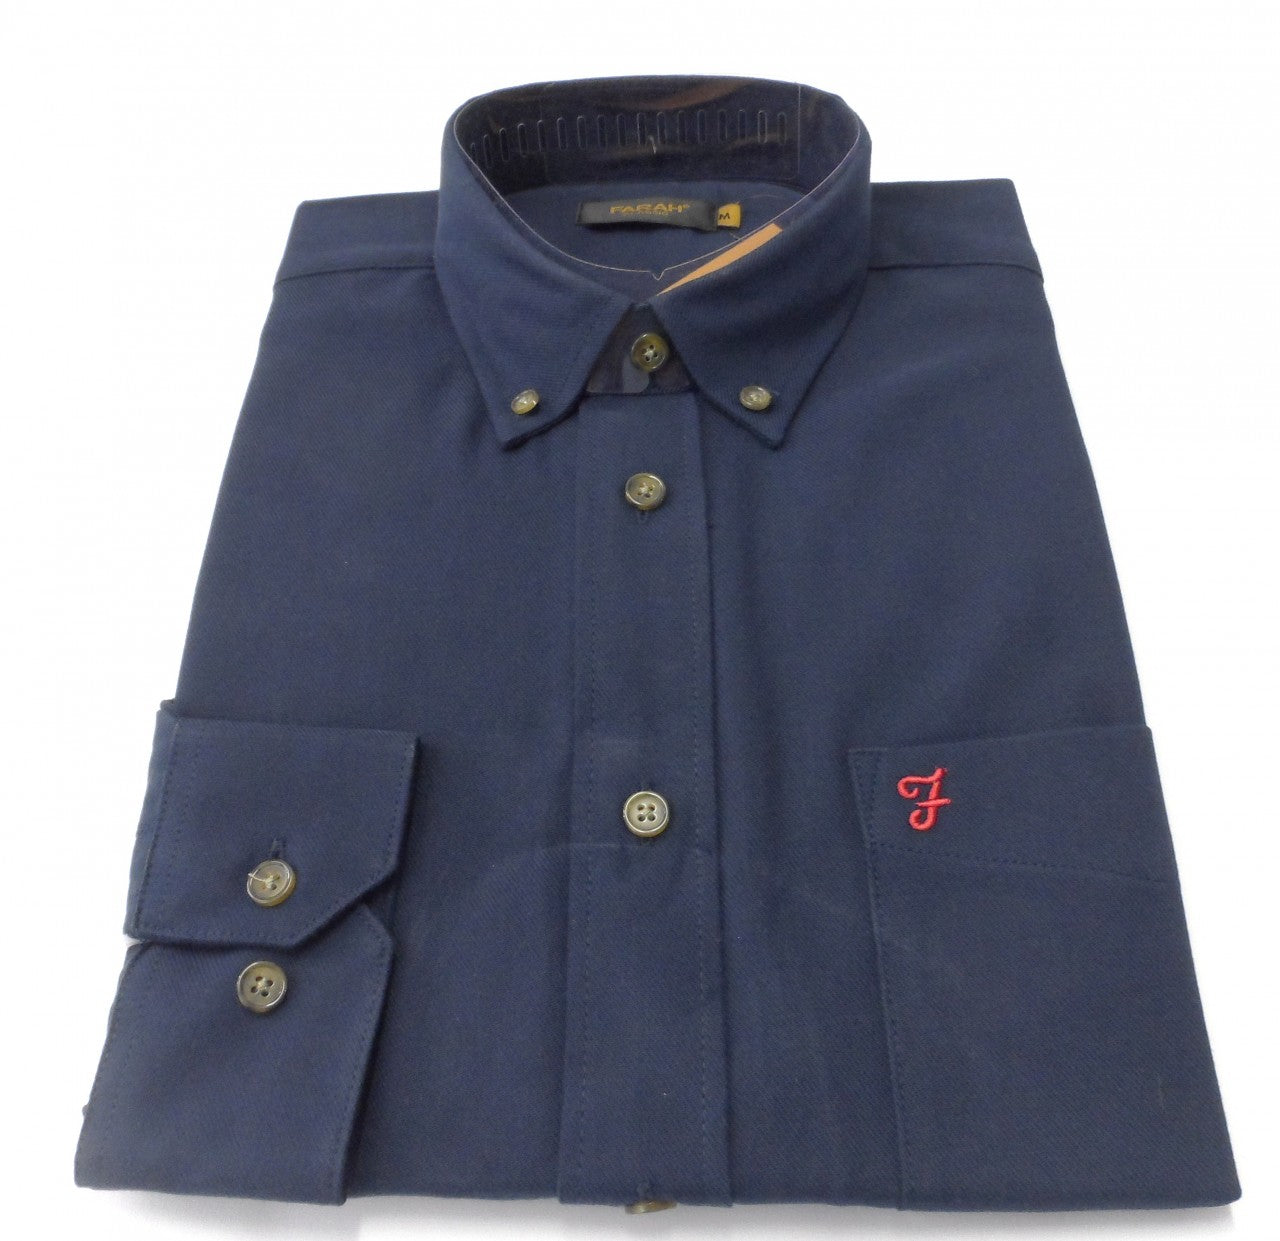 Farah Navy Selby Cotton Long Sleeved Retro Mod Button Down Shirts